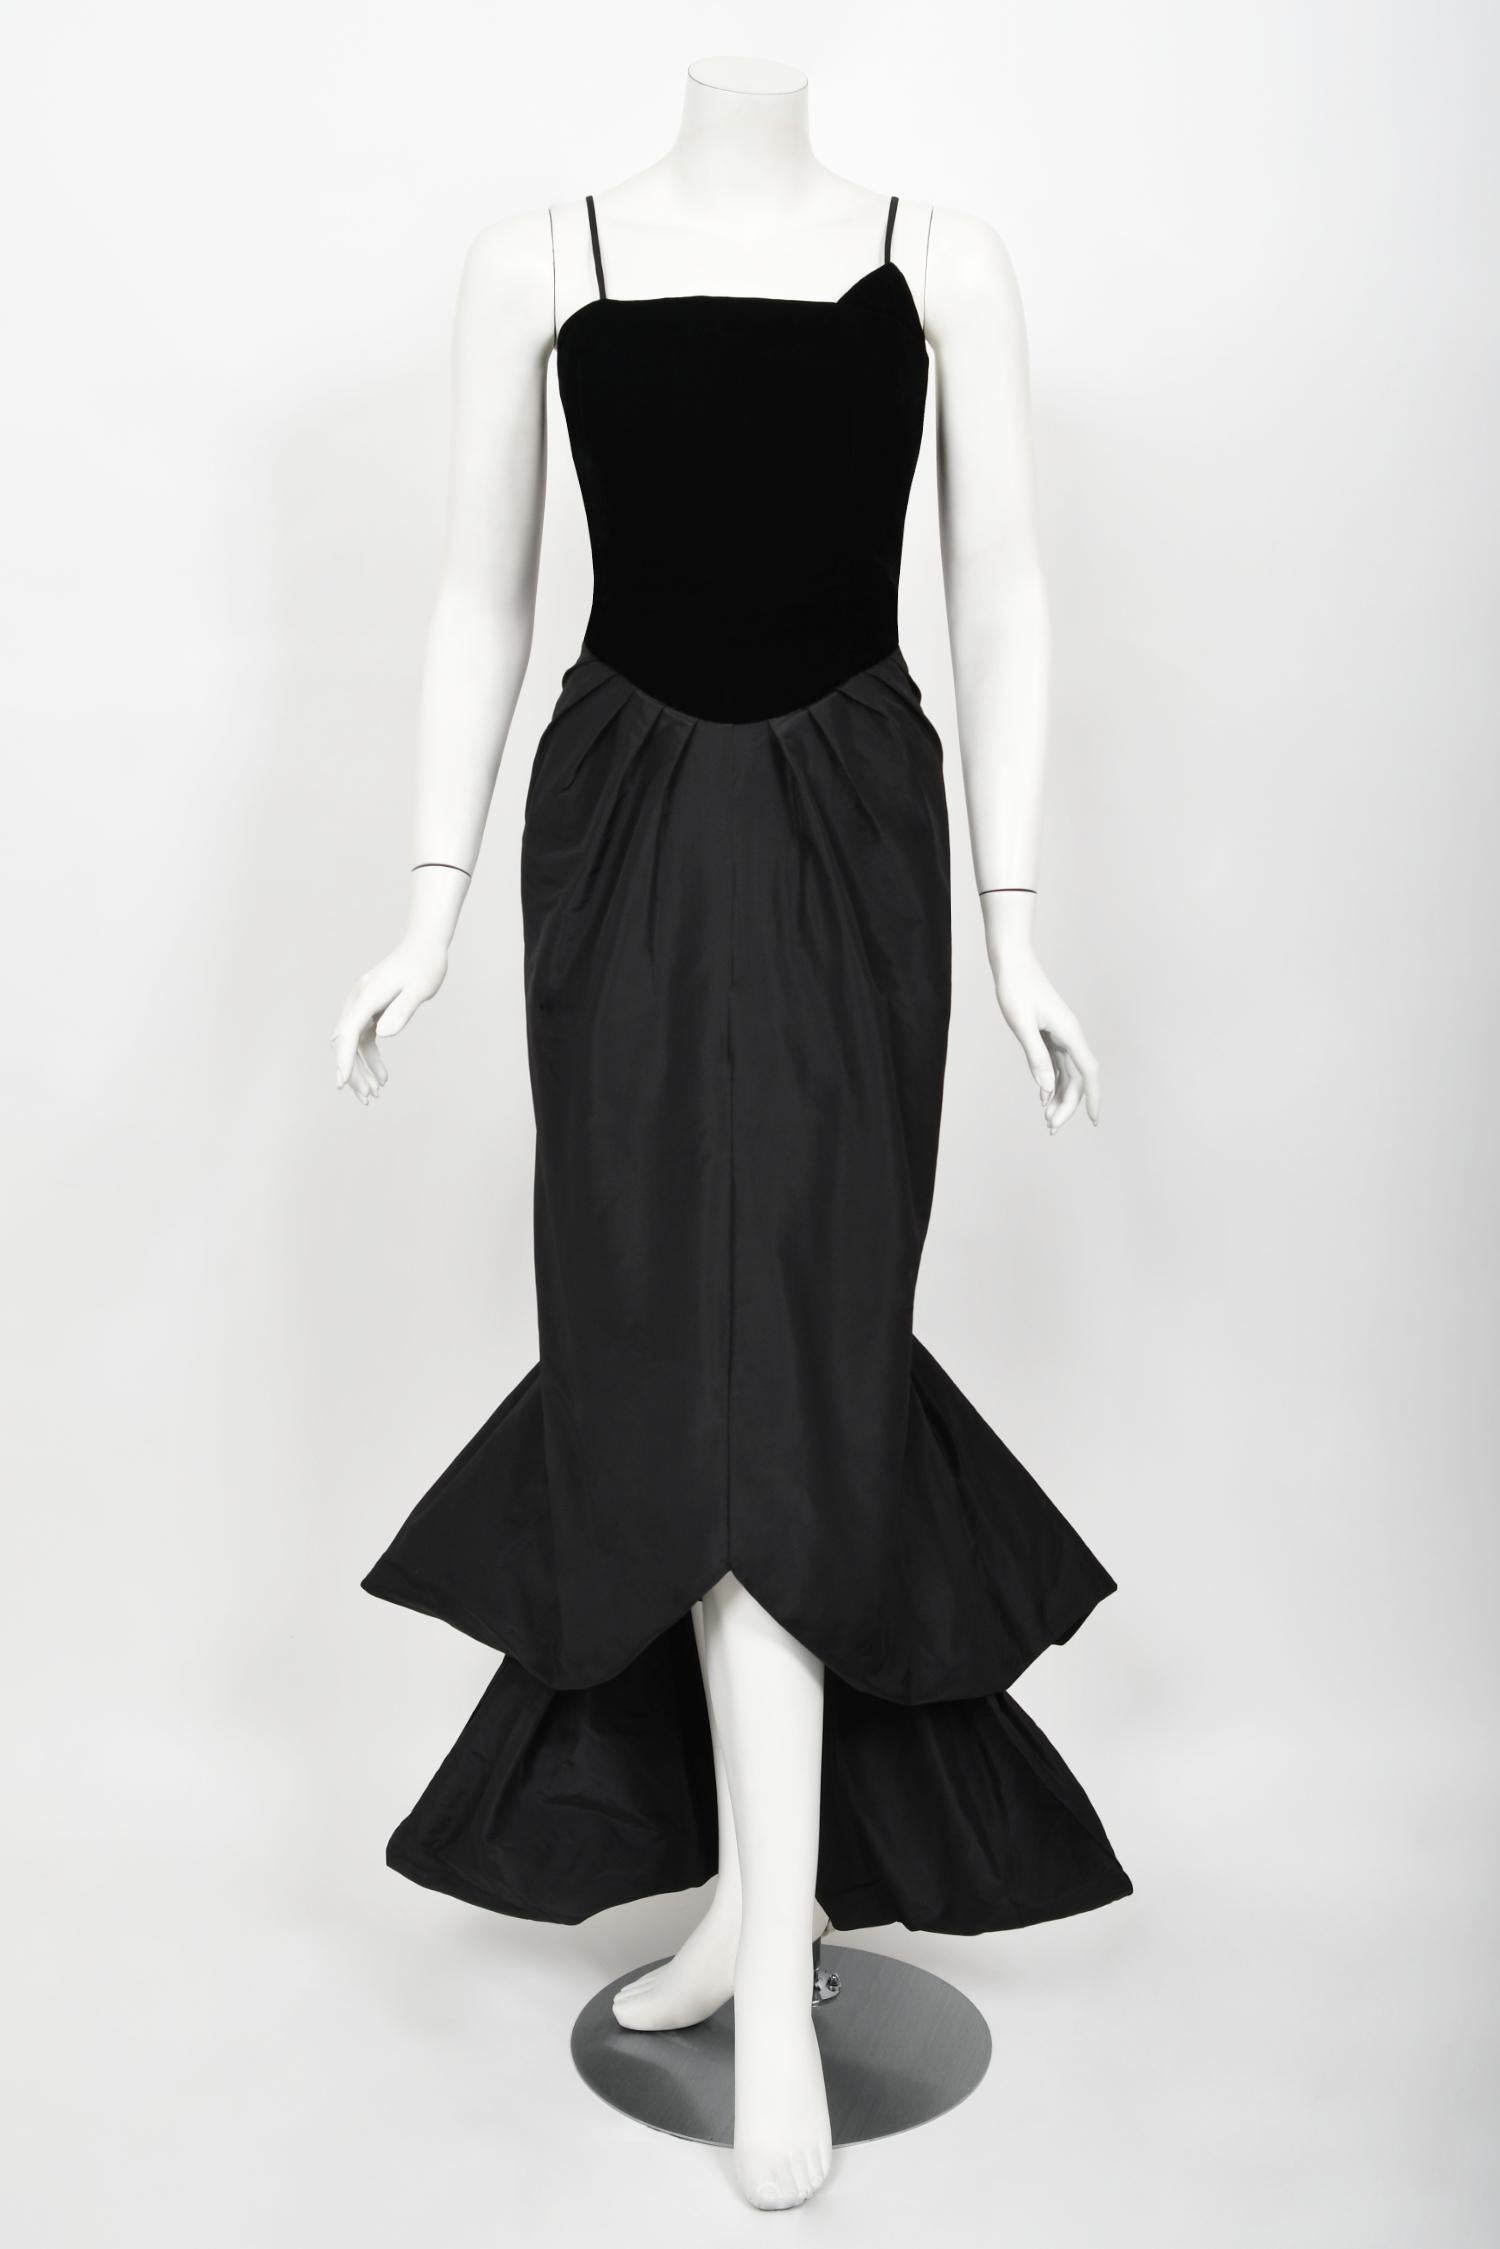 Vintage 1950's Philip Hulitar Old Hollywood Black Silk Hourglass Fishtail Dress For Sale 2